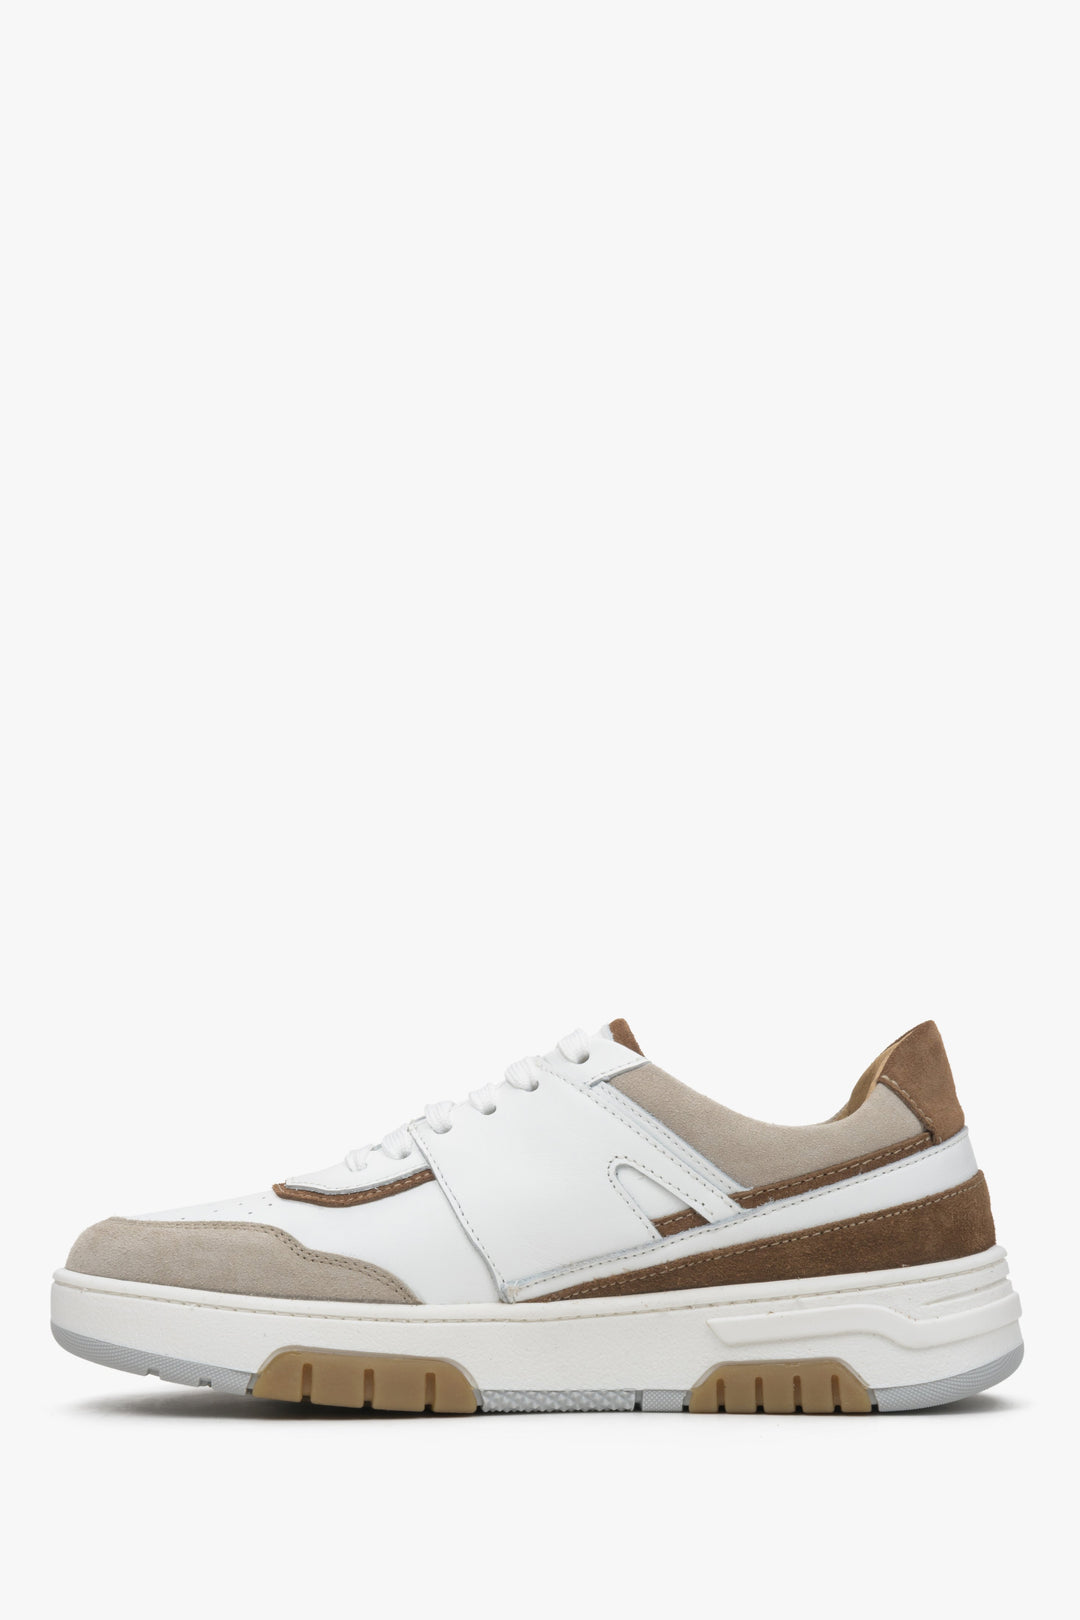 Women's brown & white sneakers made of combined materials by Estro - shoe profile.